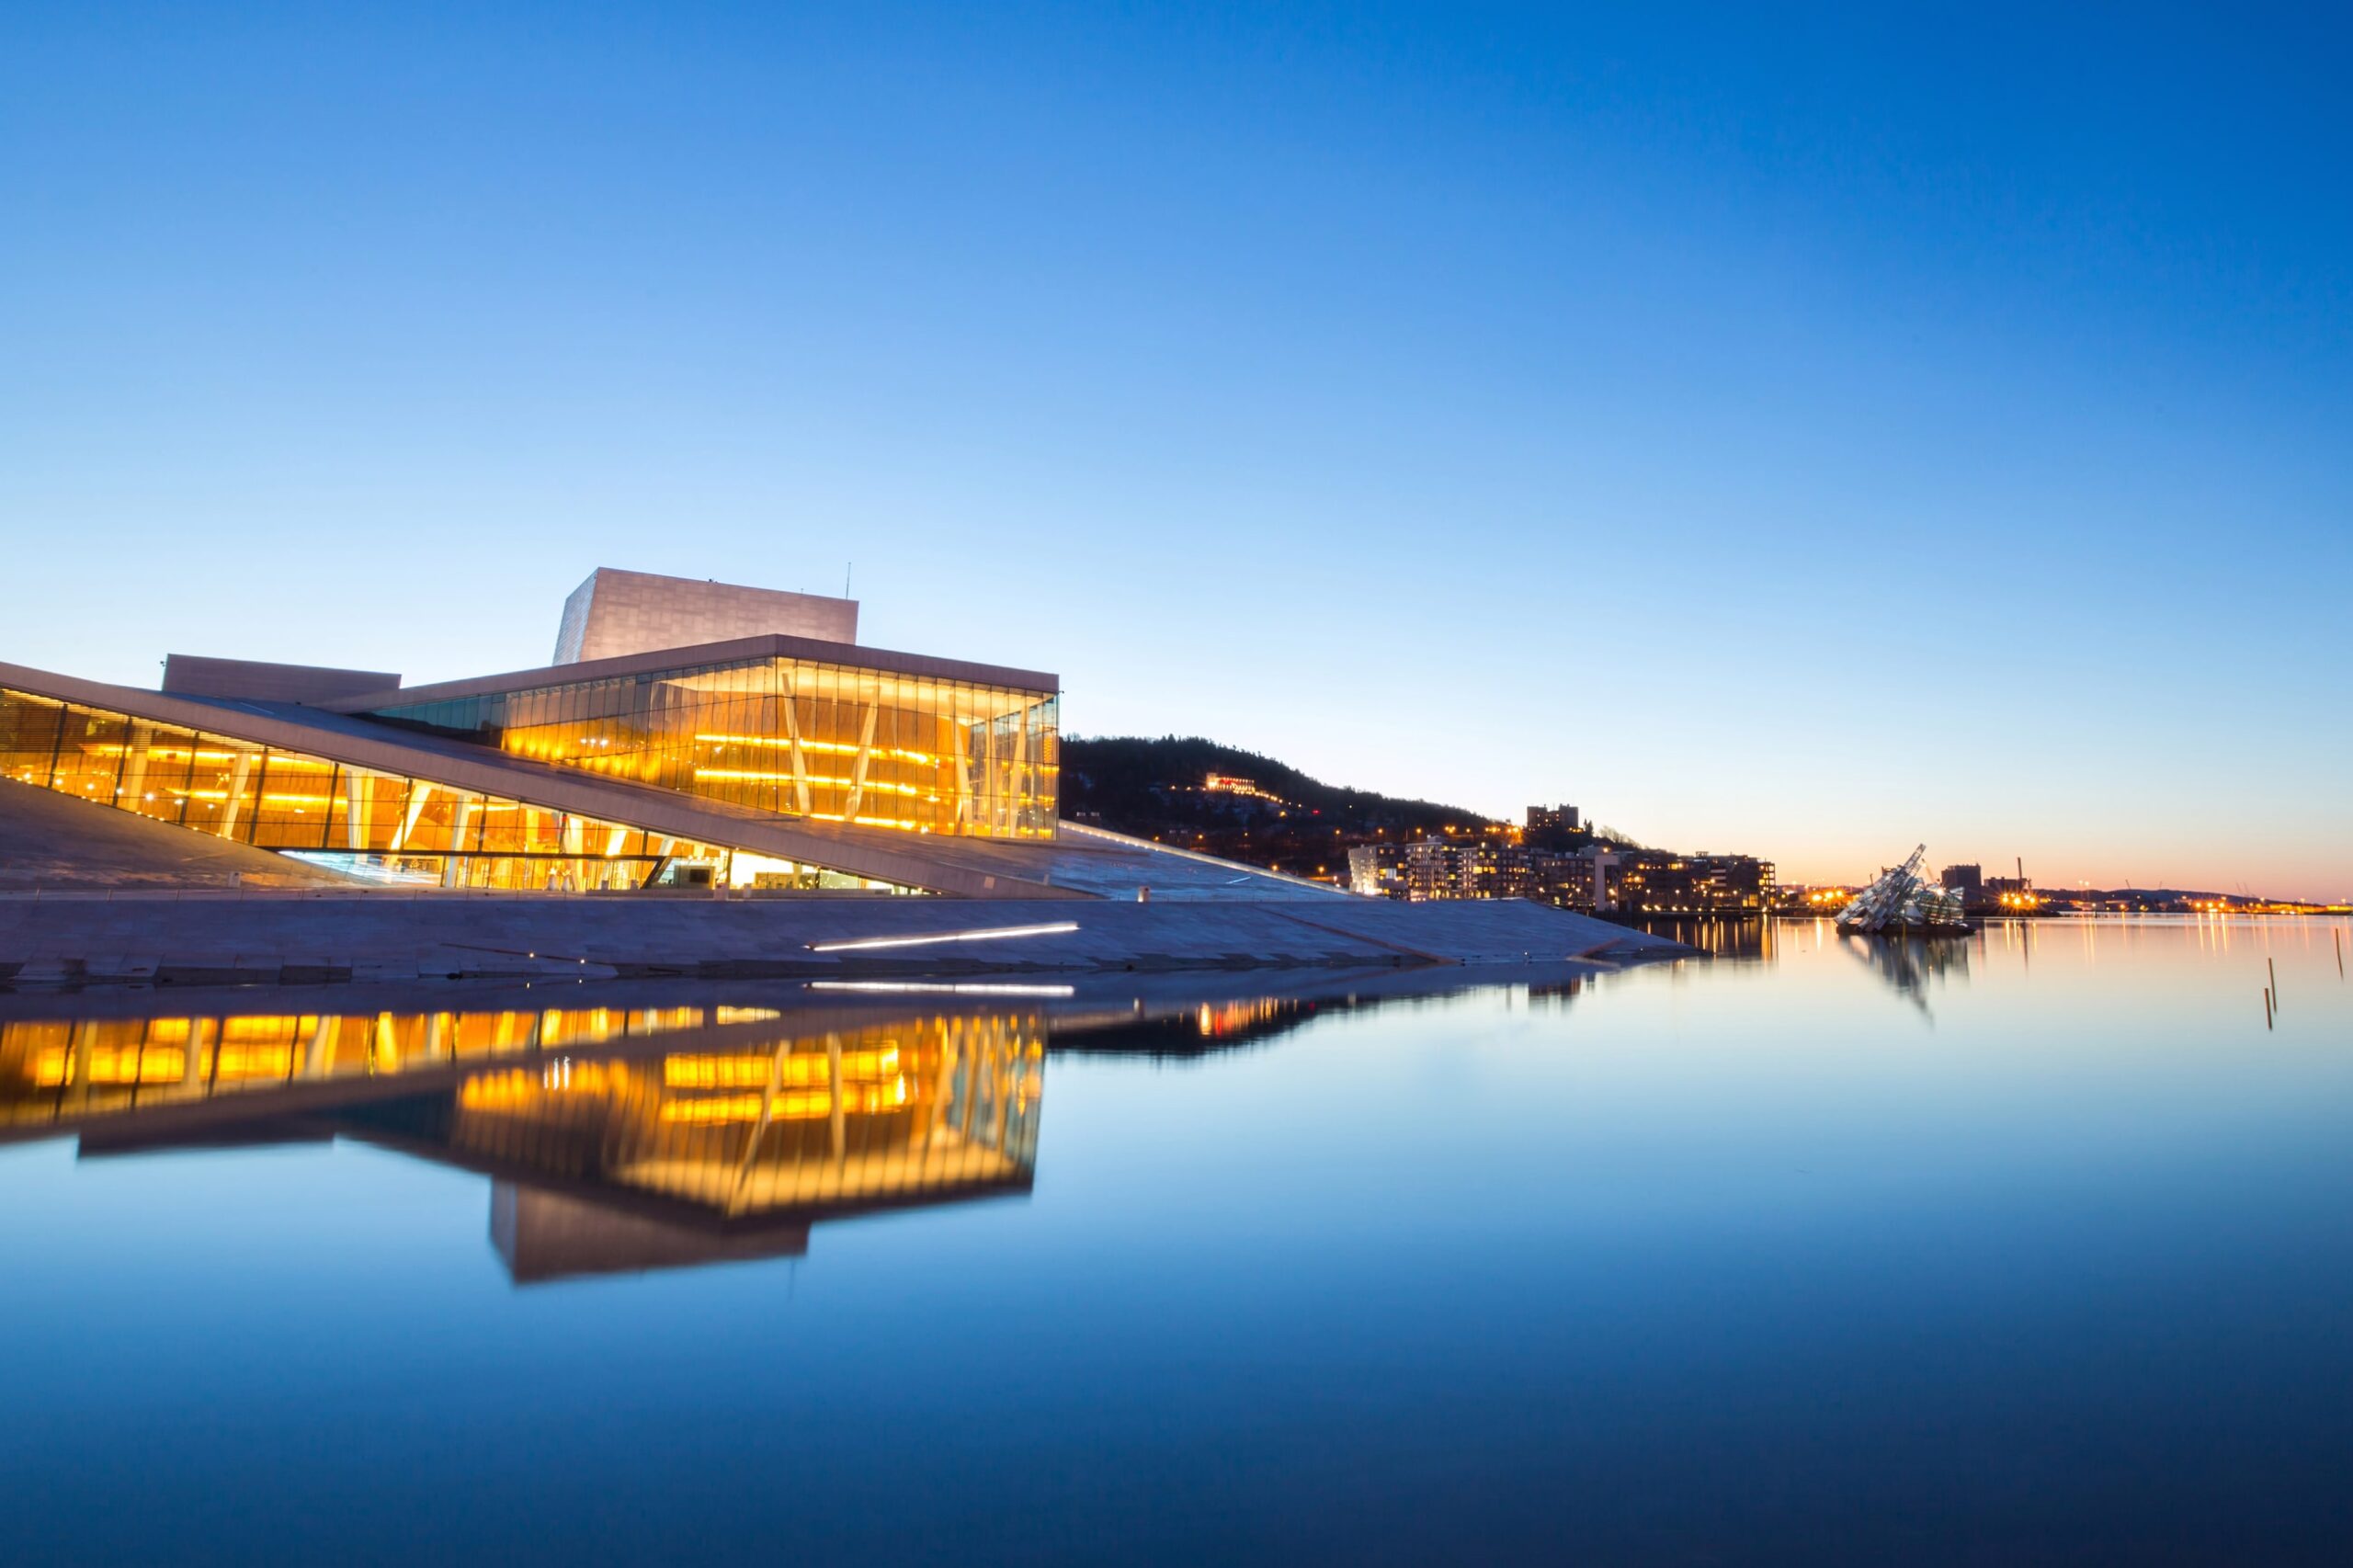 Featured image for “The Norwegian National Opera & Ballet”